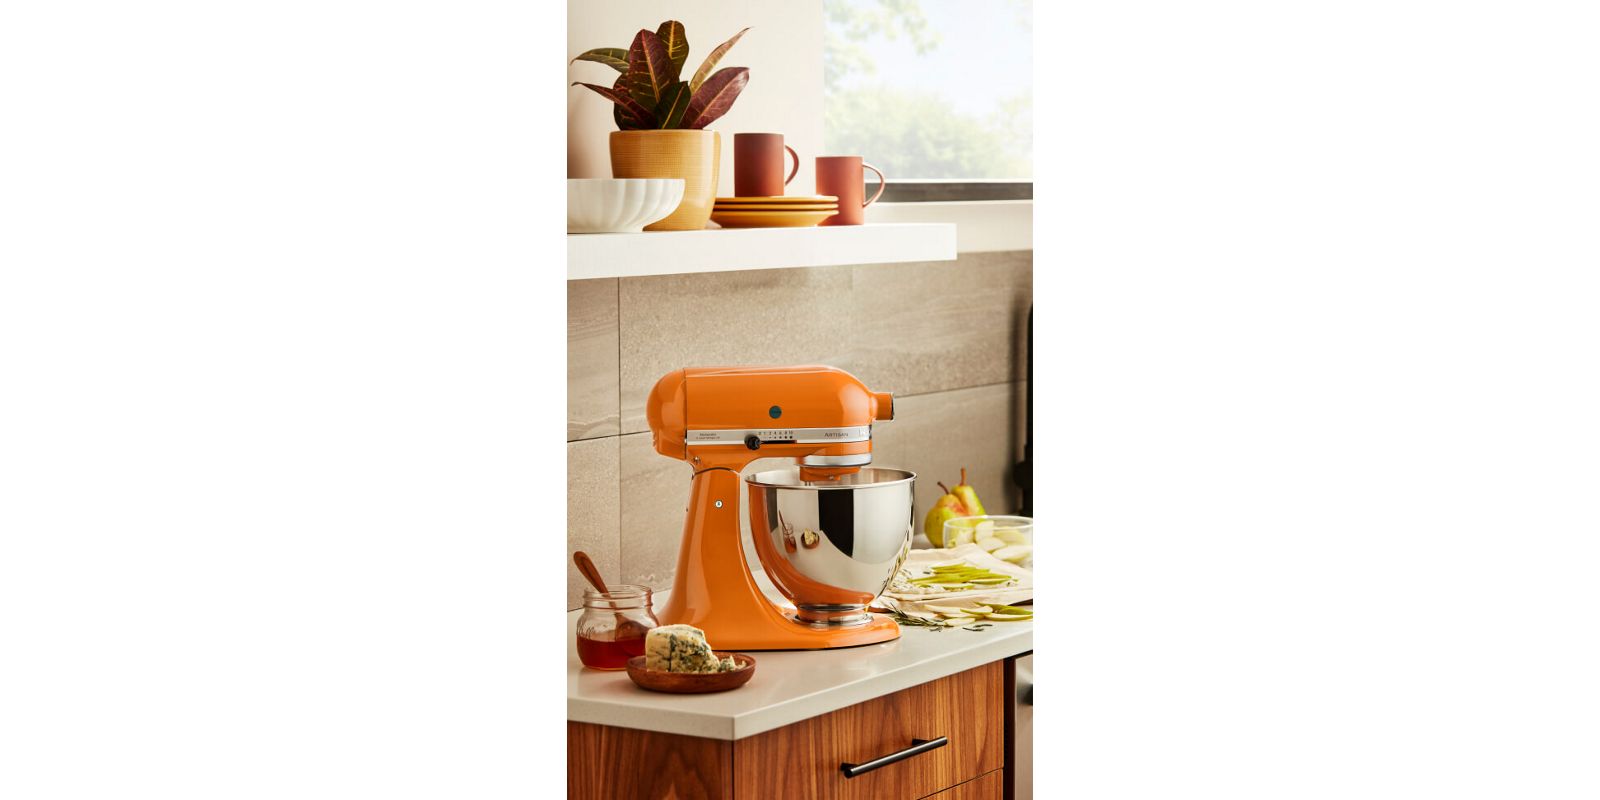 https://kitchenaid-h.assetsadobe.com/is/image/content/dam/business-unit/kitchenaid/en-us/digital-assets/pages/color-of-the-year/masonry-grid-modern--two-new.jpg?fit=constrain&fmt=jpg&hei=800&resMode=sharp2&utc=2021-02-19T20:31:34Z&wid=1600